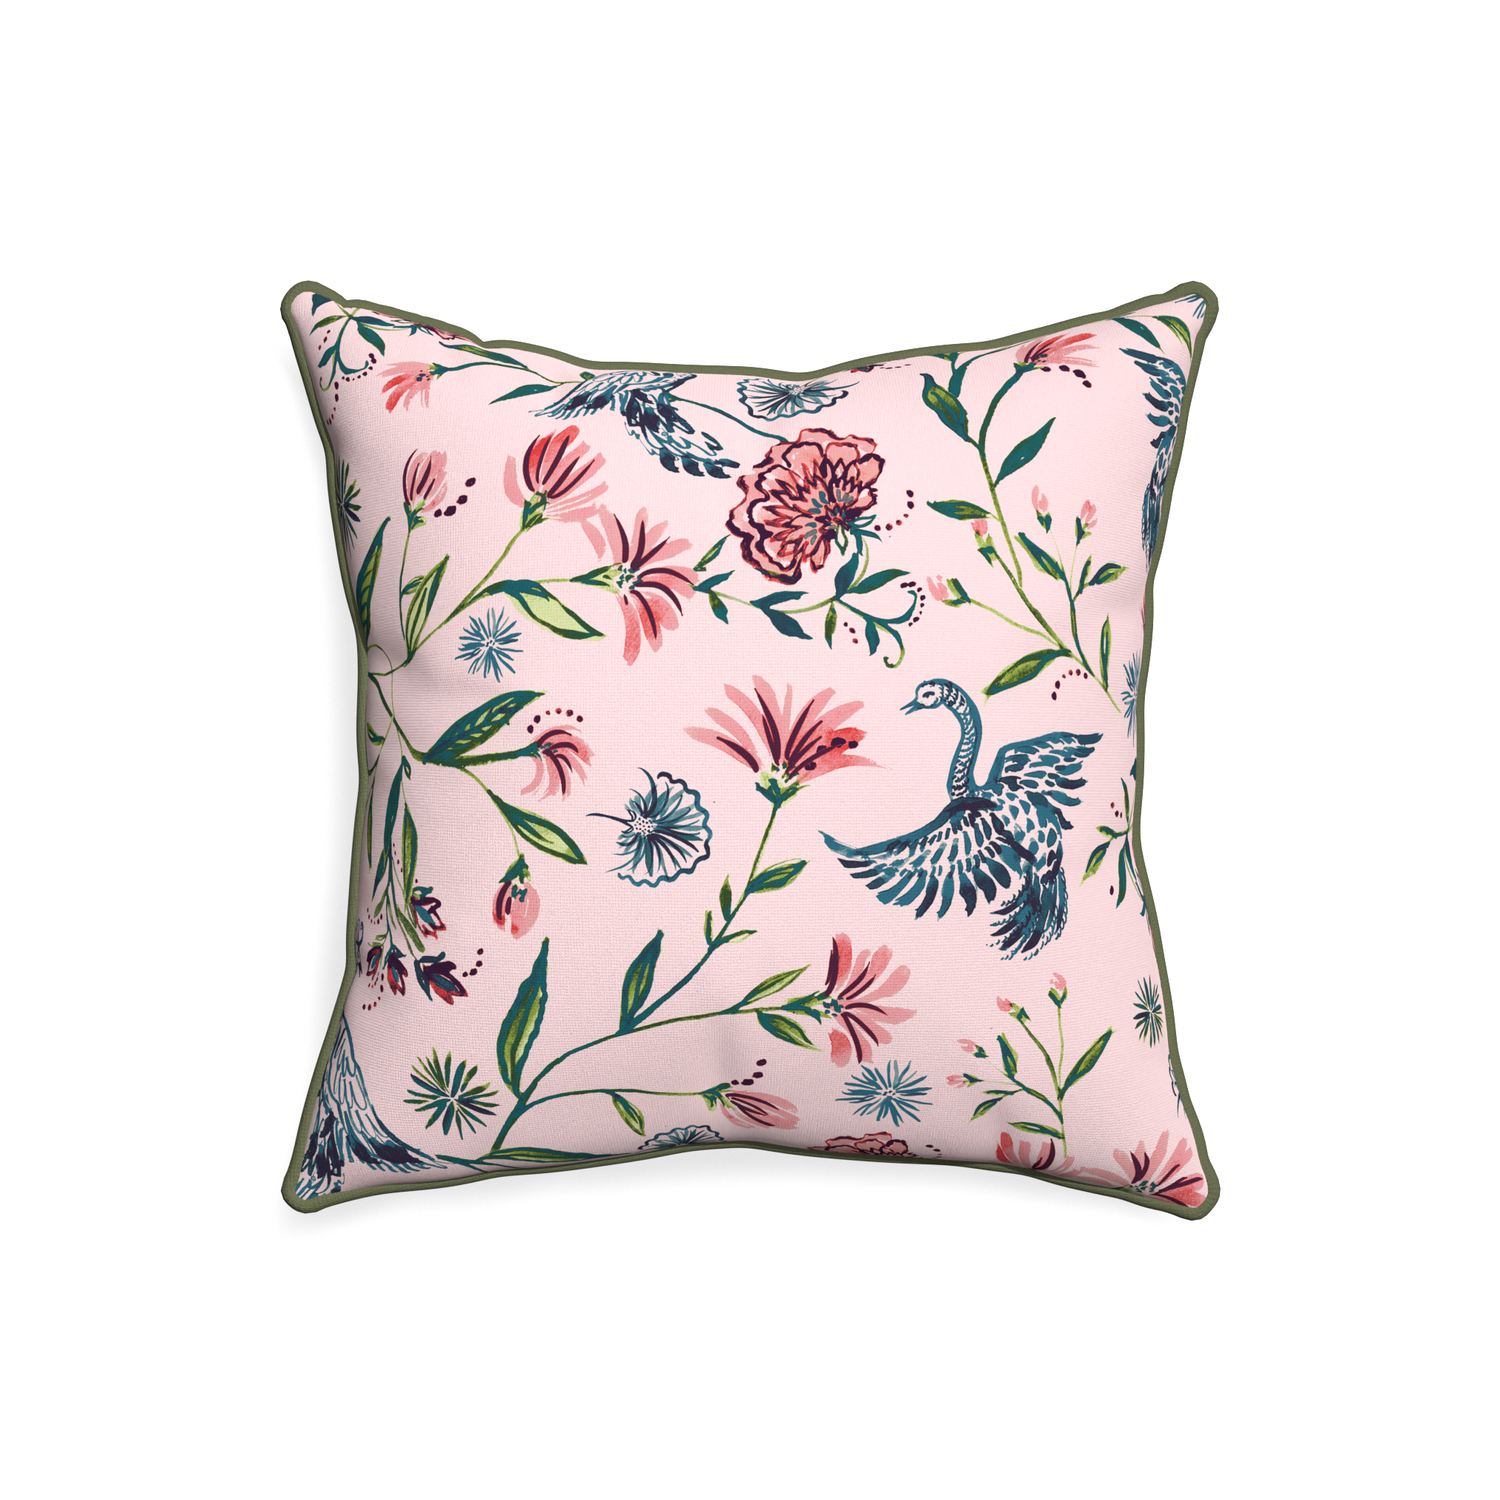 20-square daphne rose custom pillow with f piping on white background